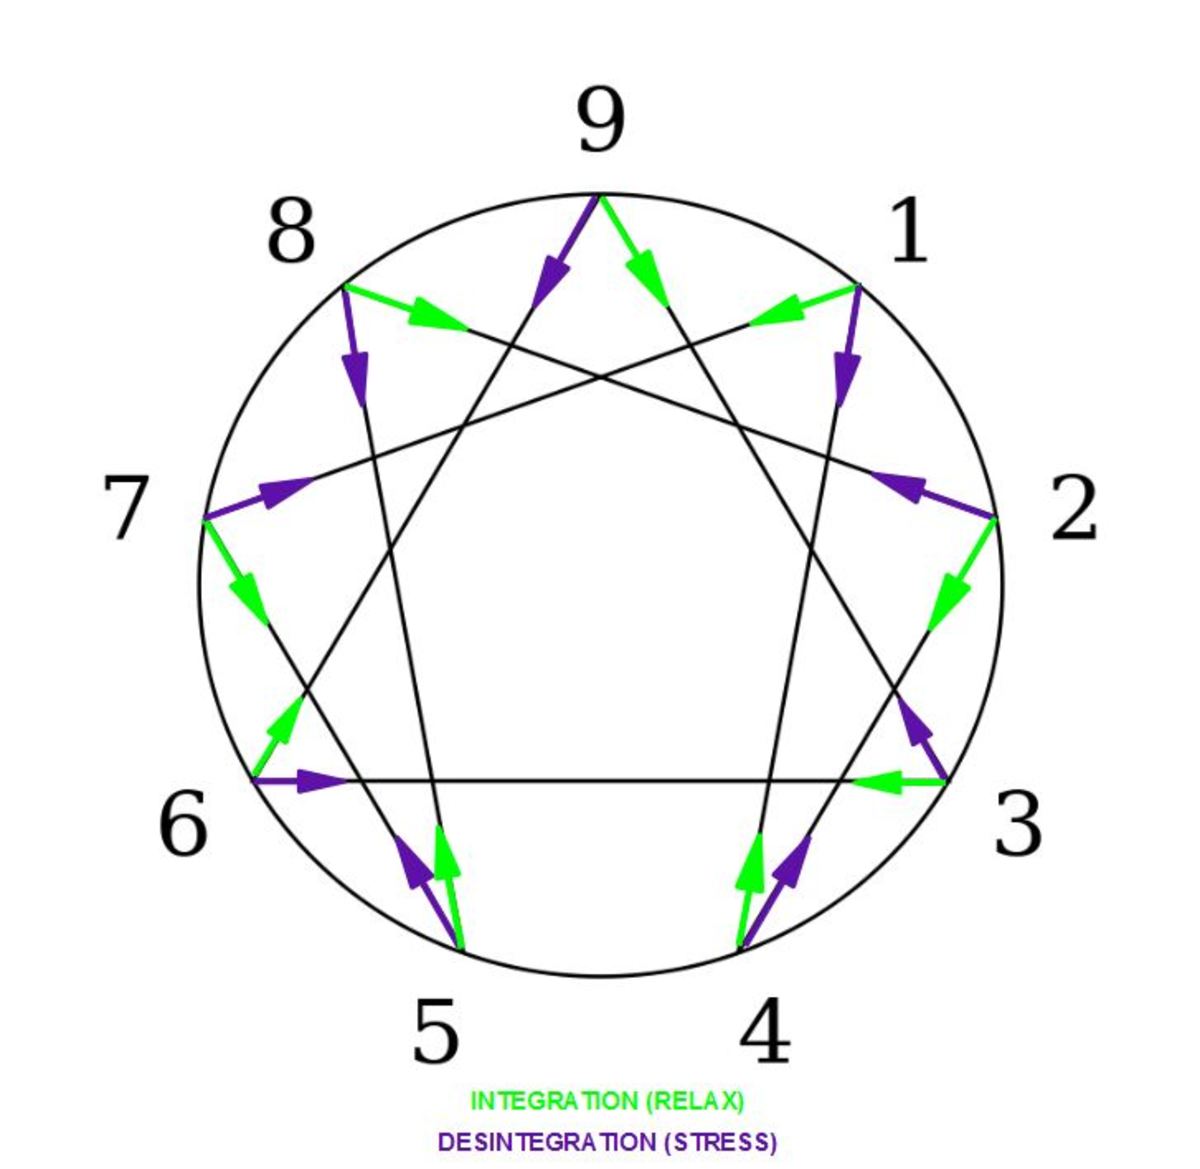 Enneagram symbol with arrows both of integration and disintegration